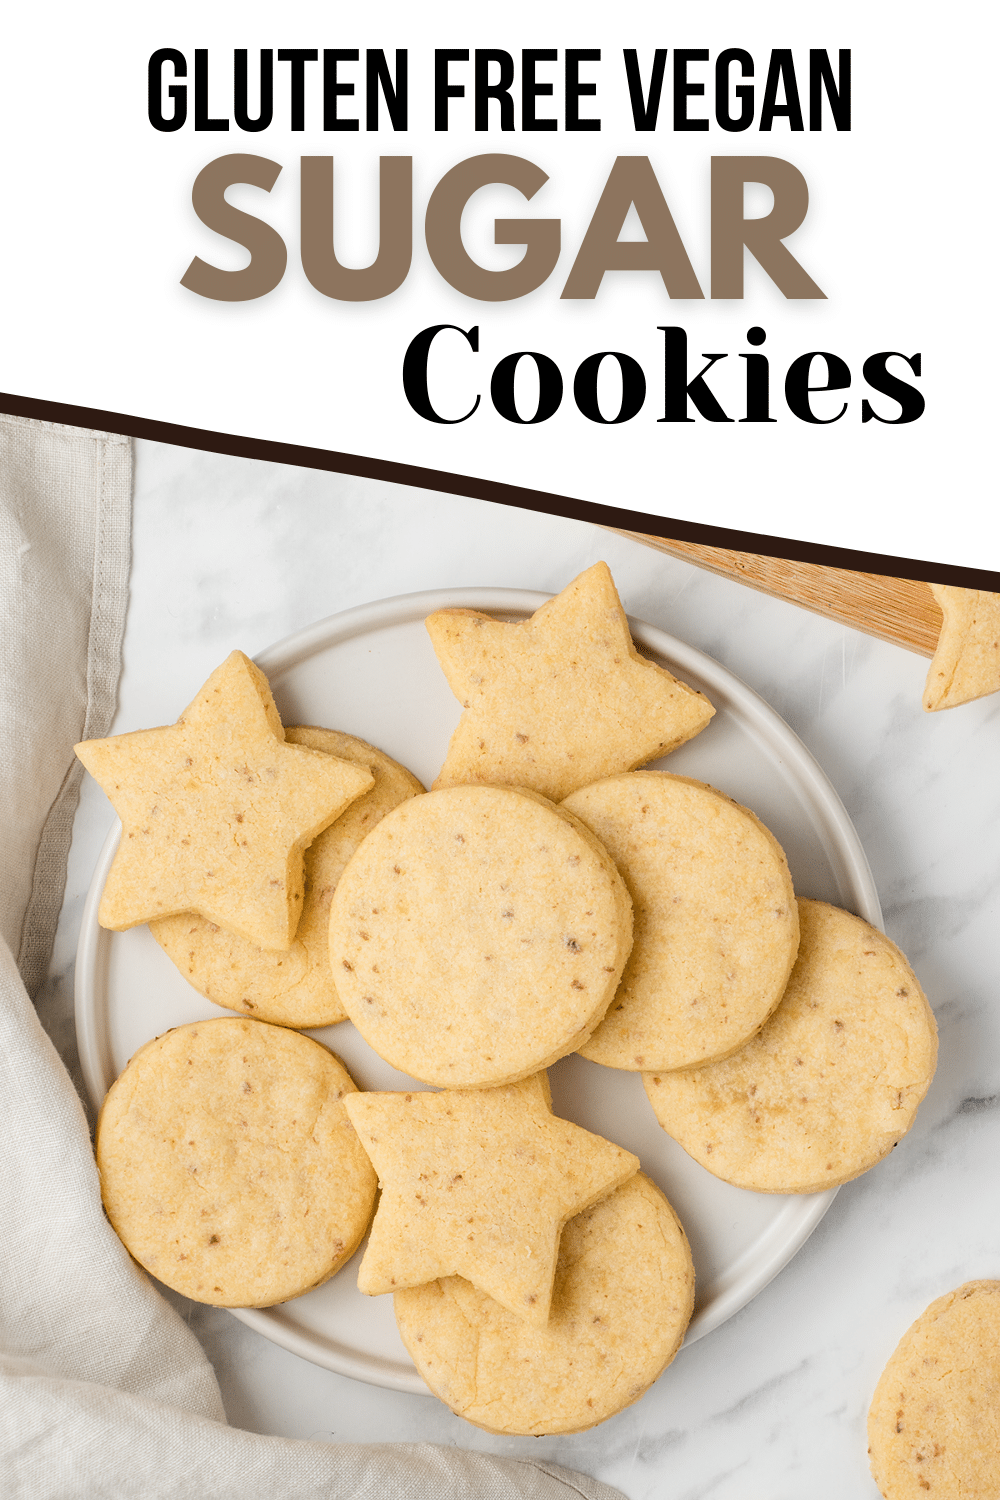 Vegan Sugar Cookies are buttery, crunchy, and easy to decorate! Cut your favorite shapes and make this vegan cookie recipe for every holiday season.